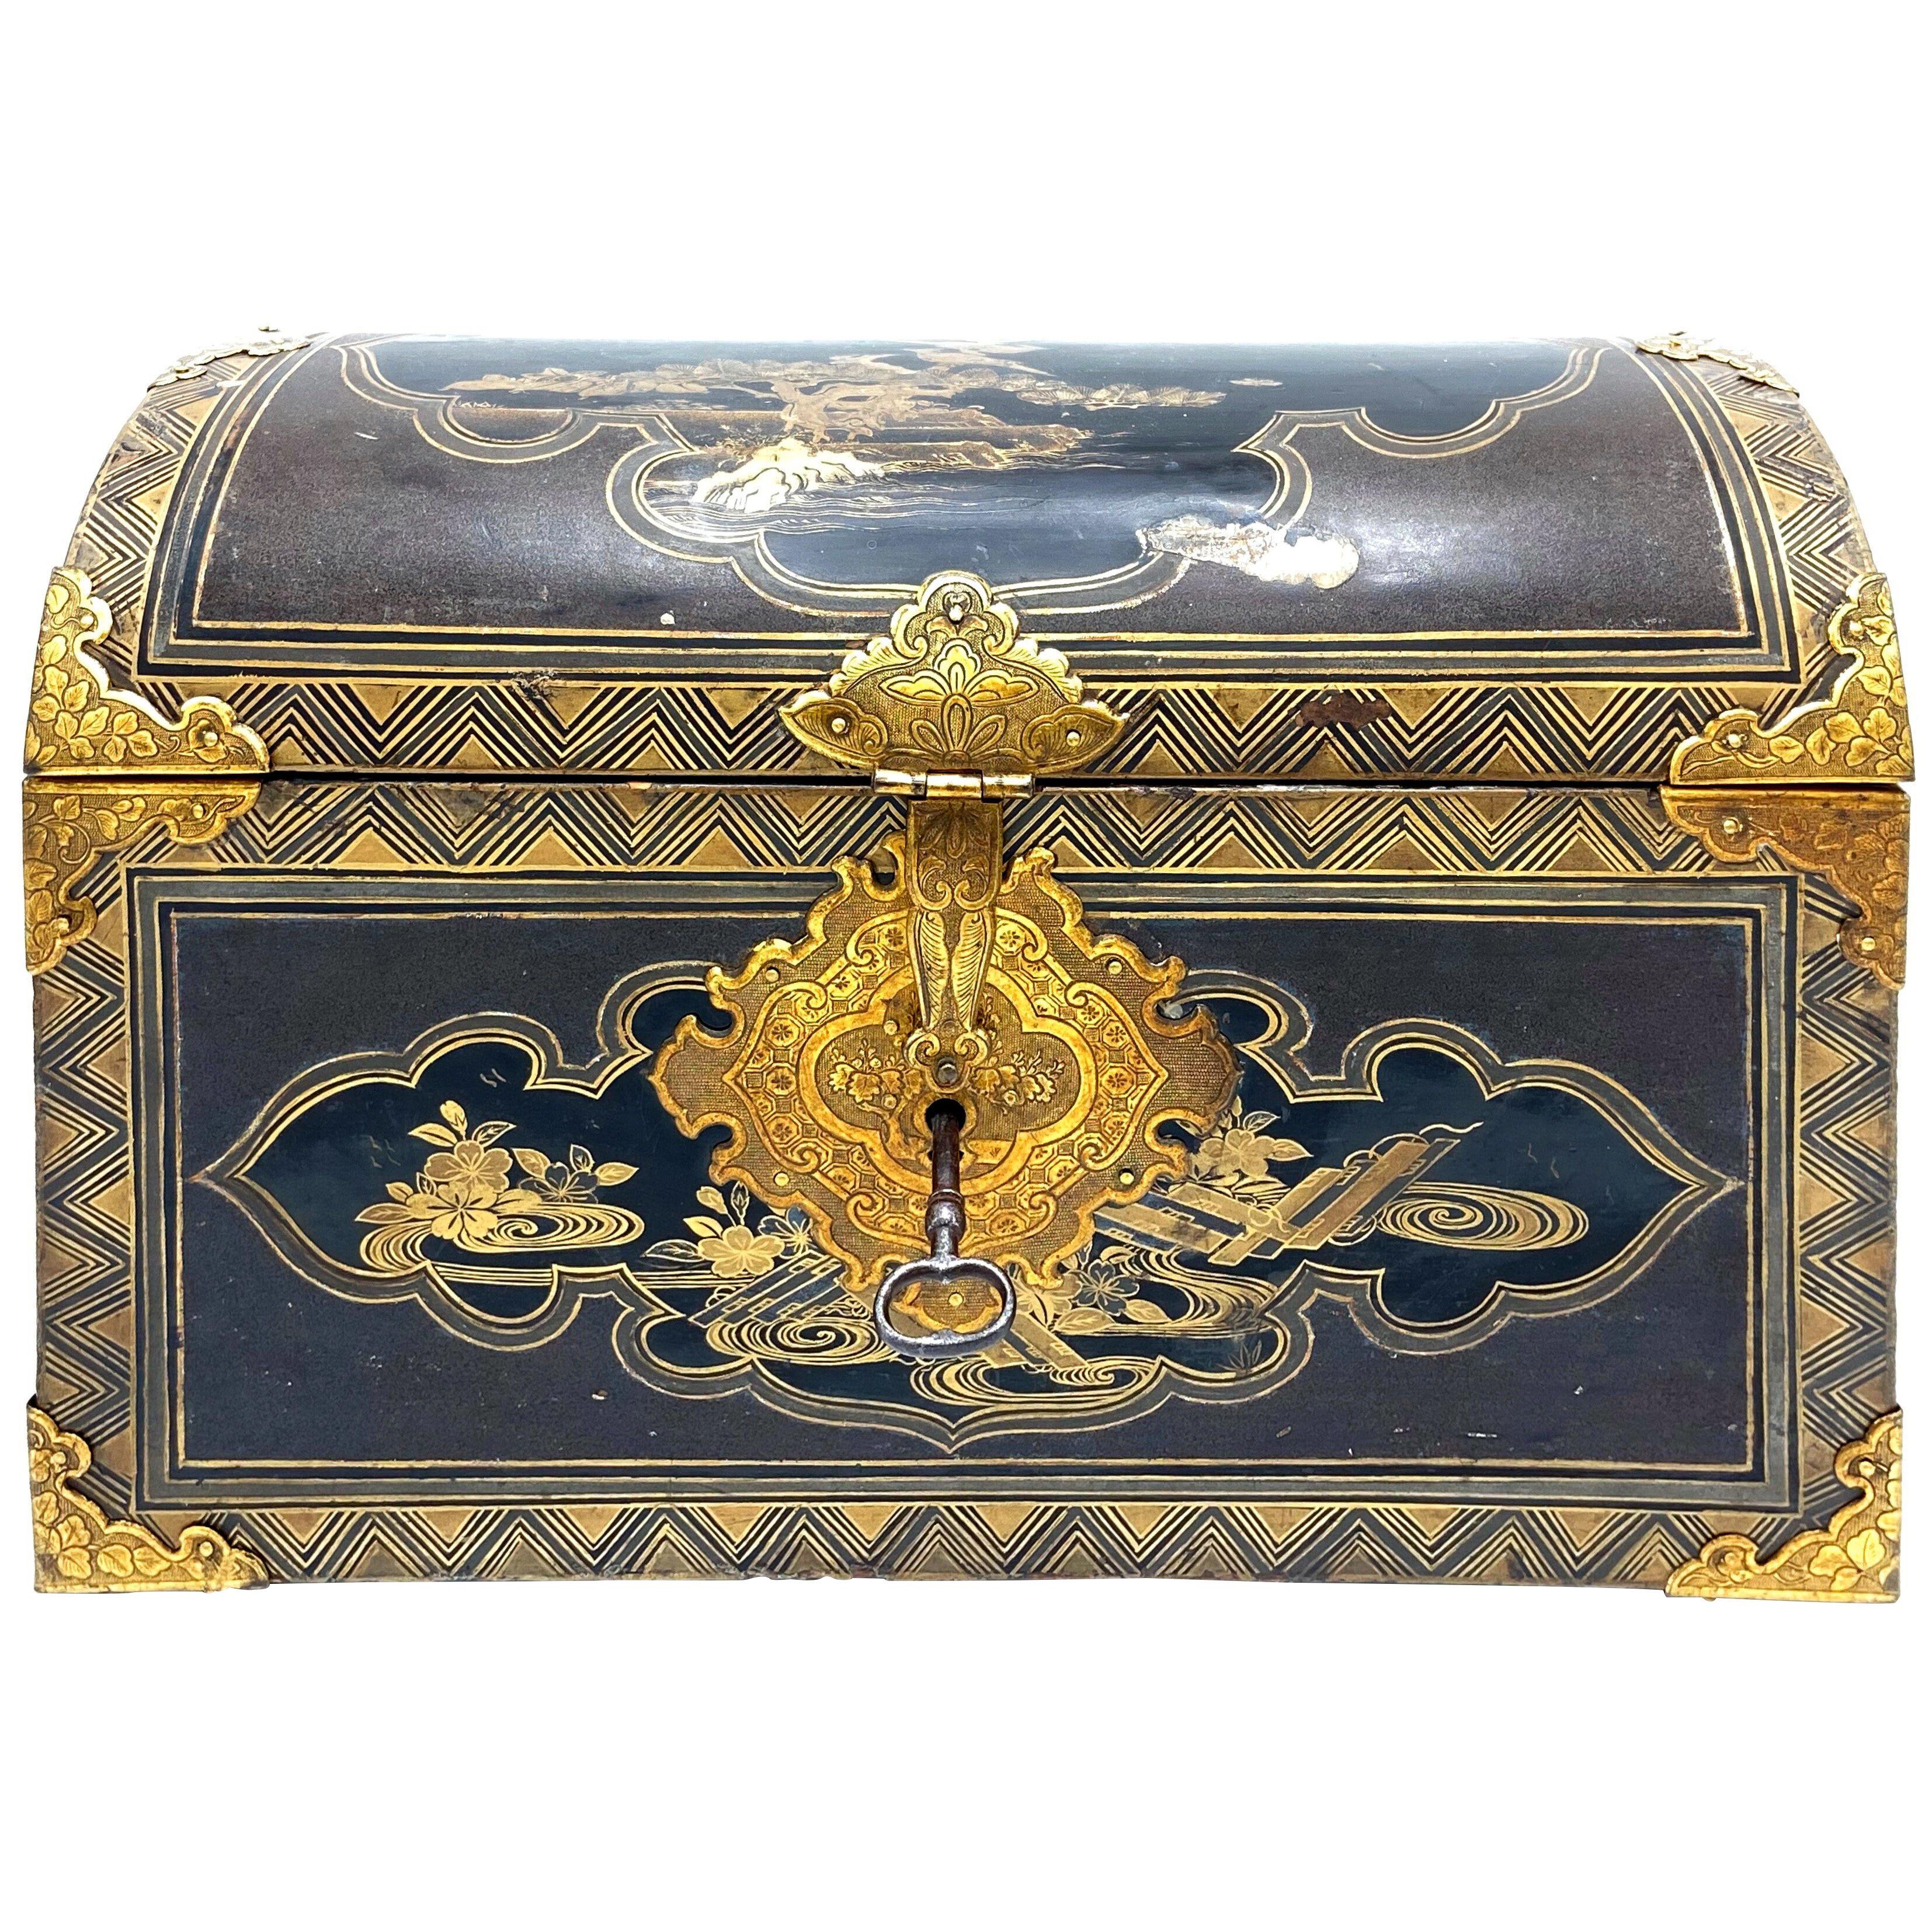 A small Japanese lacquer coffer